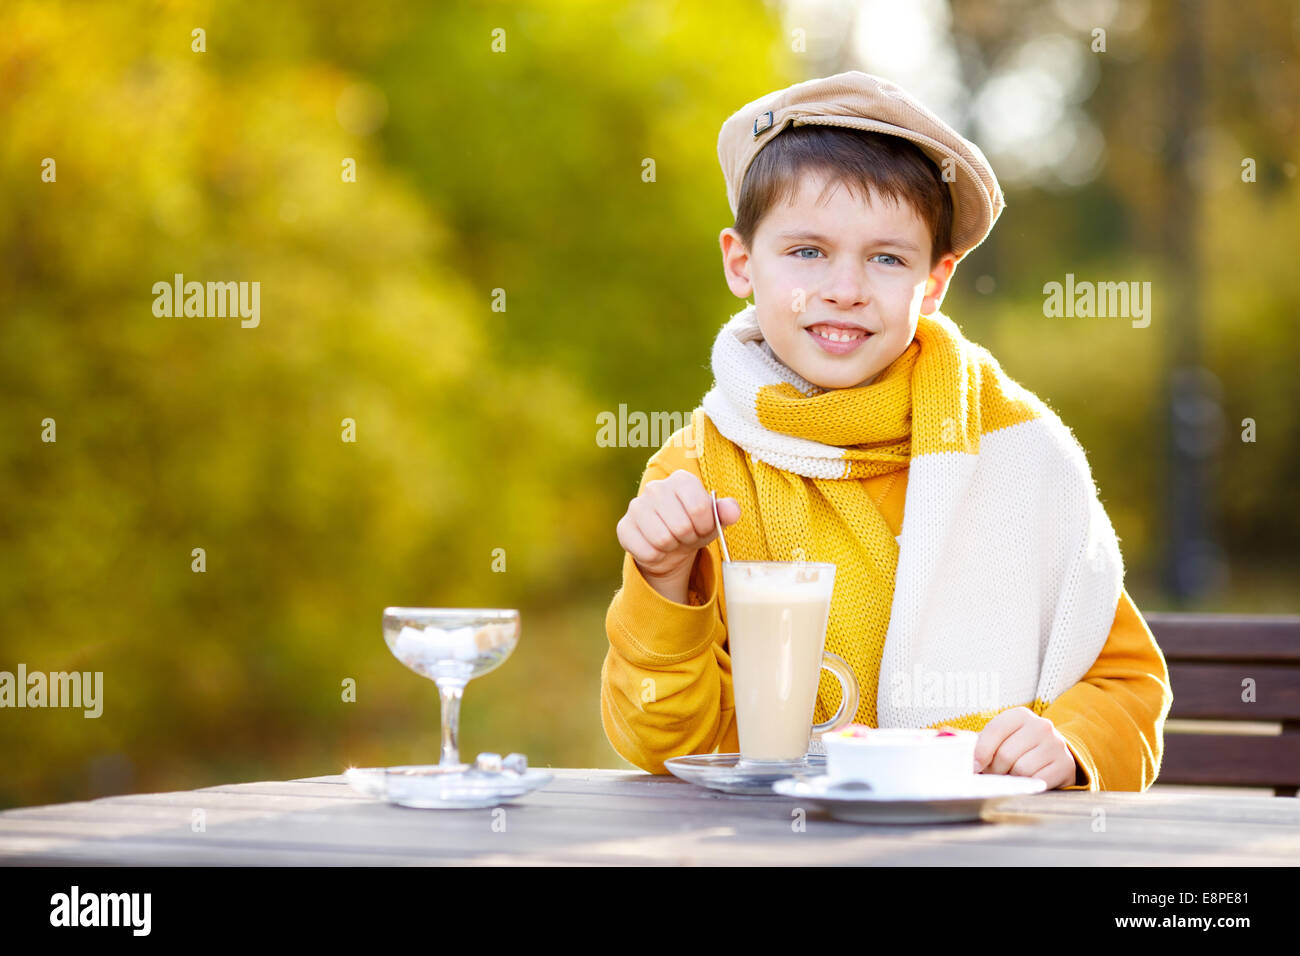 Little Boy drinking hot chocolate in cafe Banque D'Images